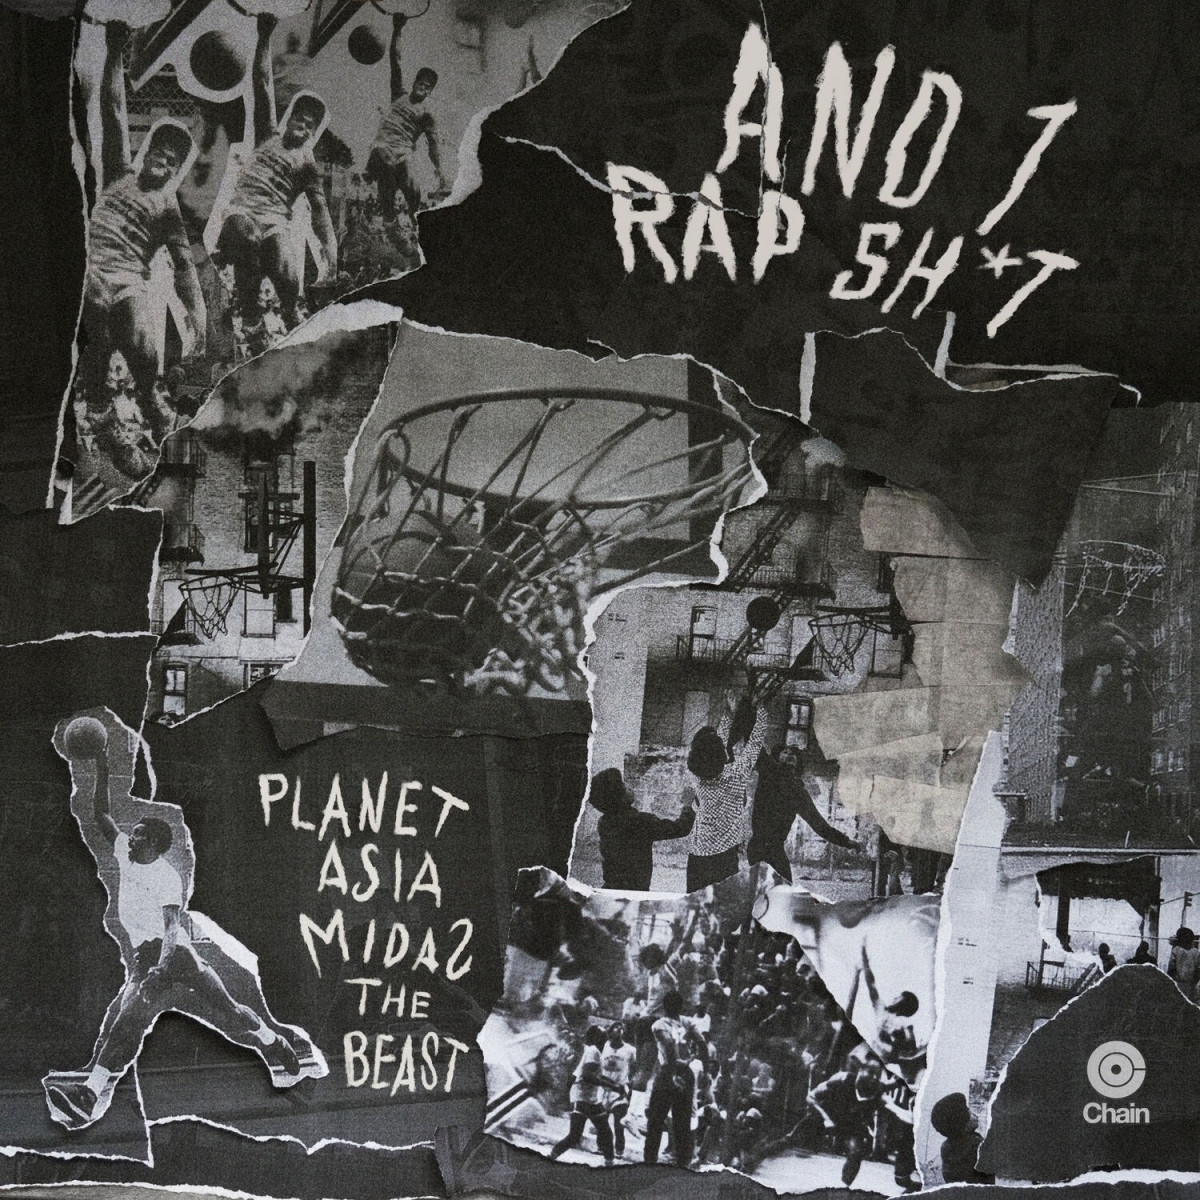 Planet Asia & MidaZ the BEAST — «And 1 Rap Shit»